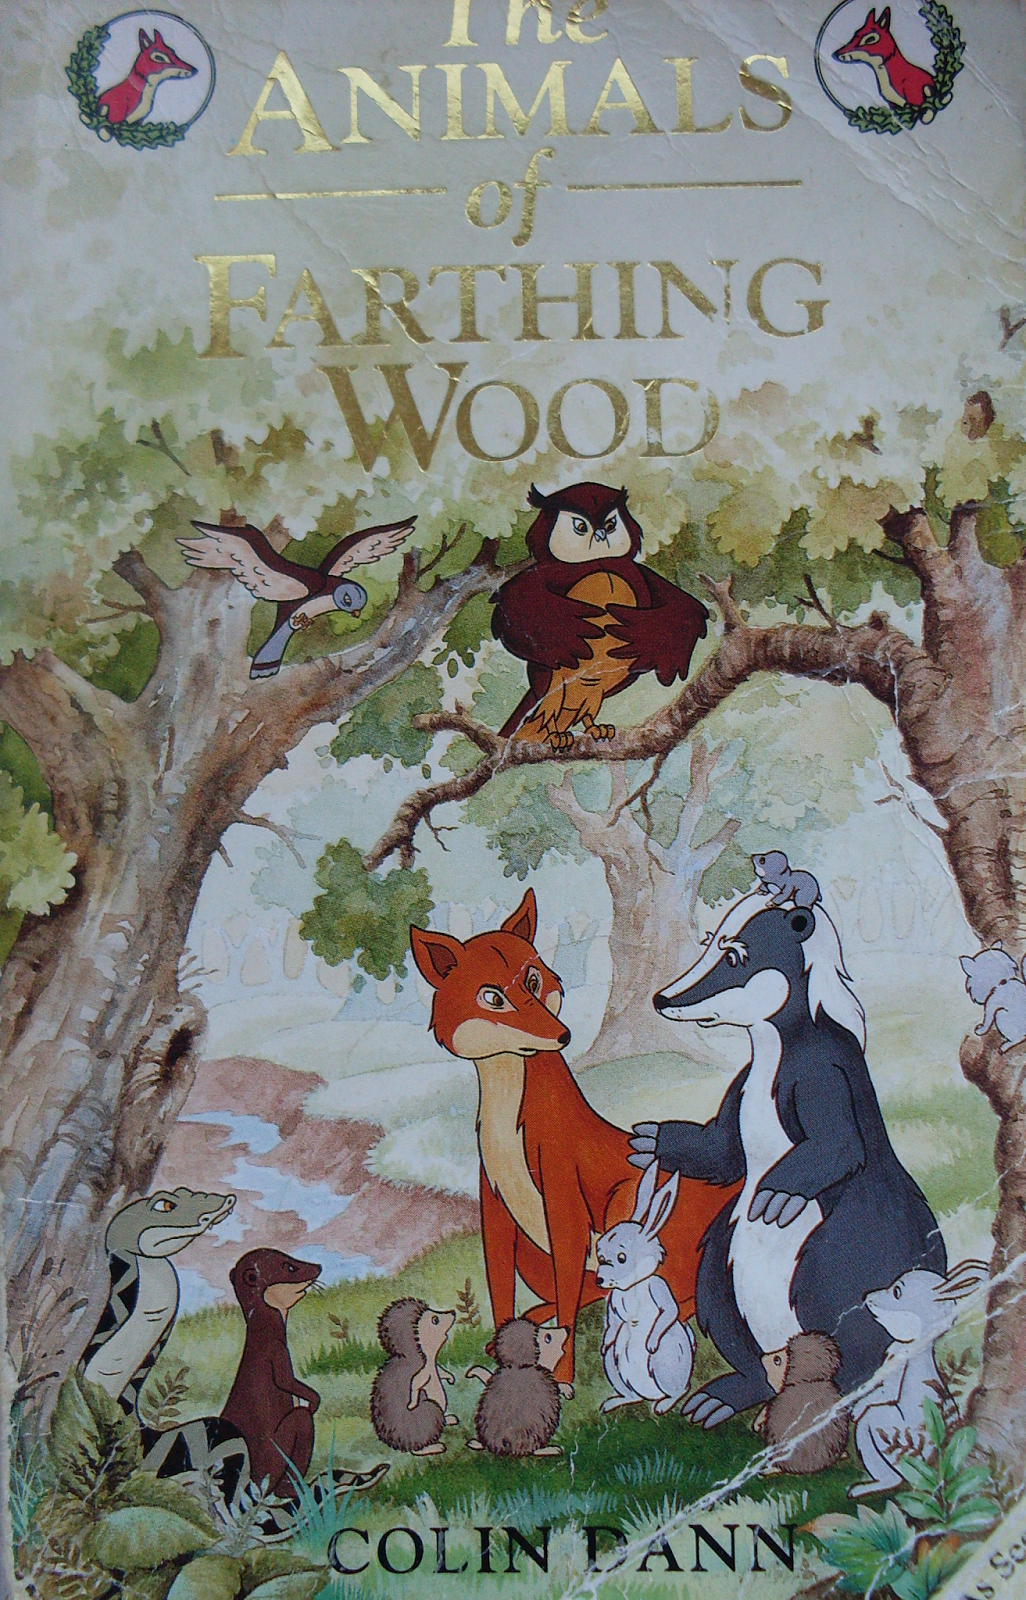 ANIMALS OF FARTHING WOOD THE ADVENTURE BEGINS by Colin